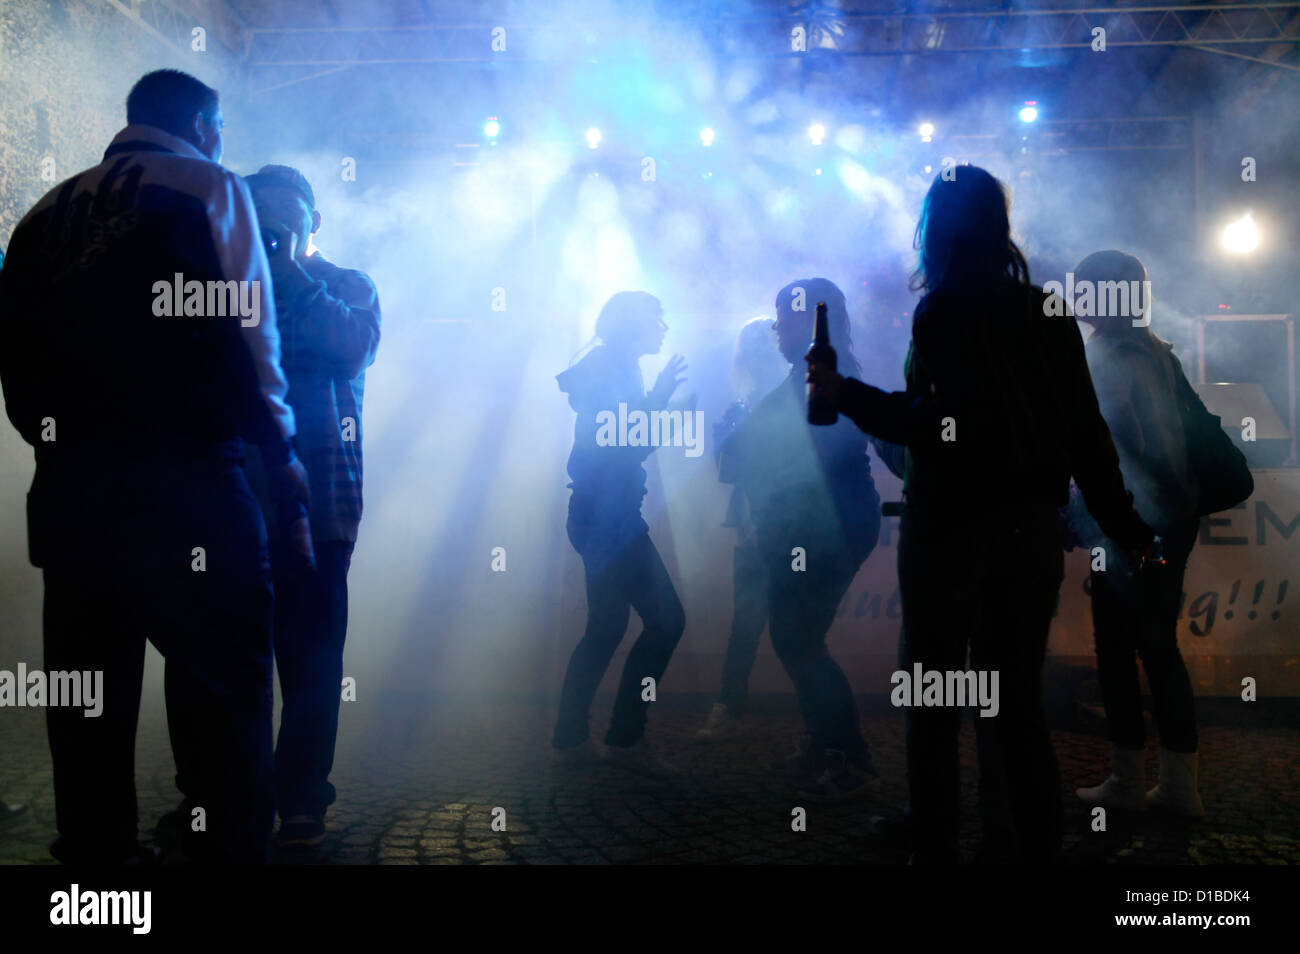 Sangerhausen, Germany, dancing and drinking adolescents in the spotlight Stock Photo